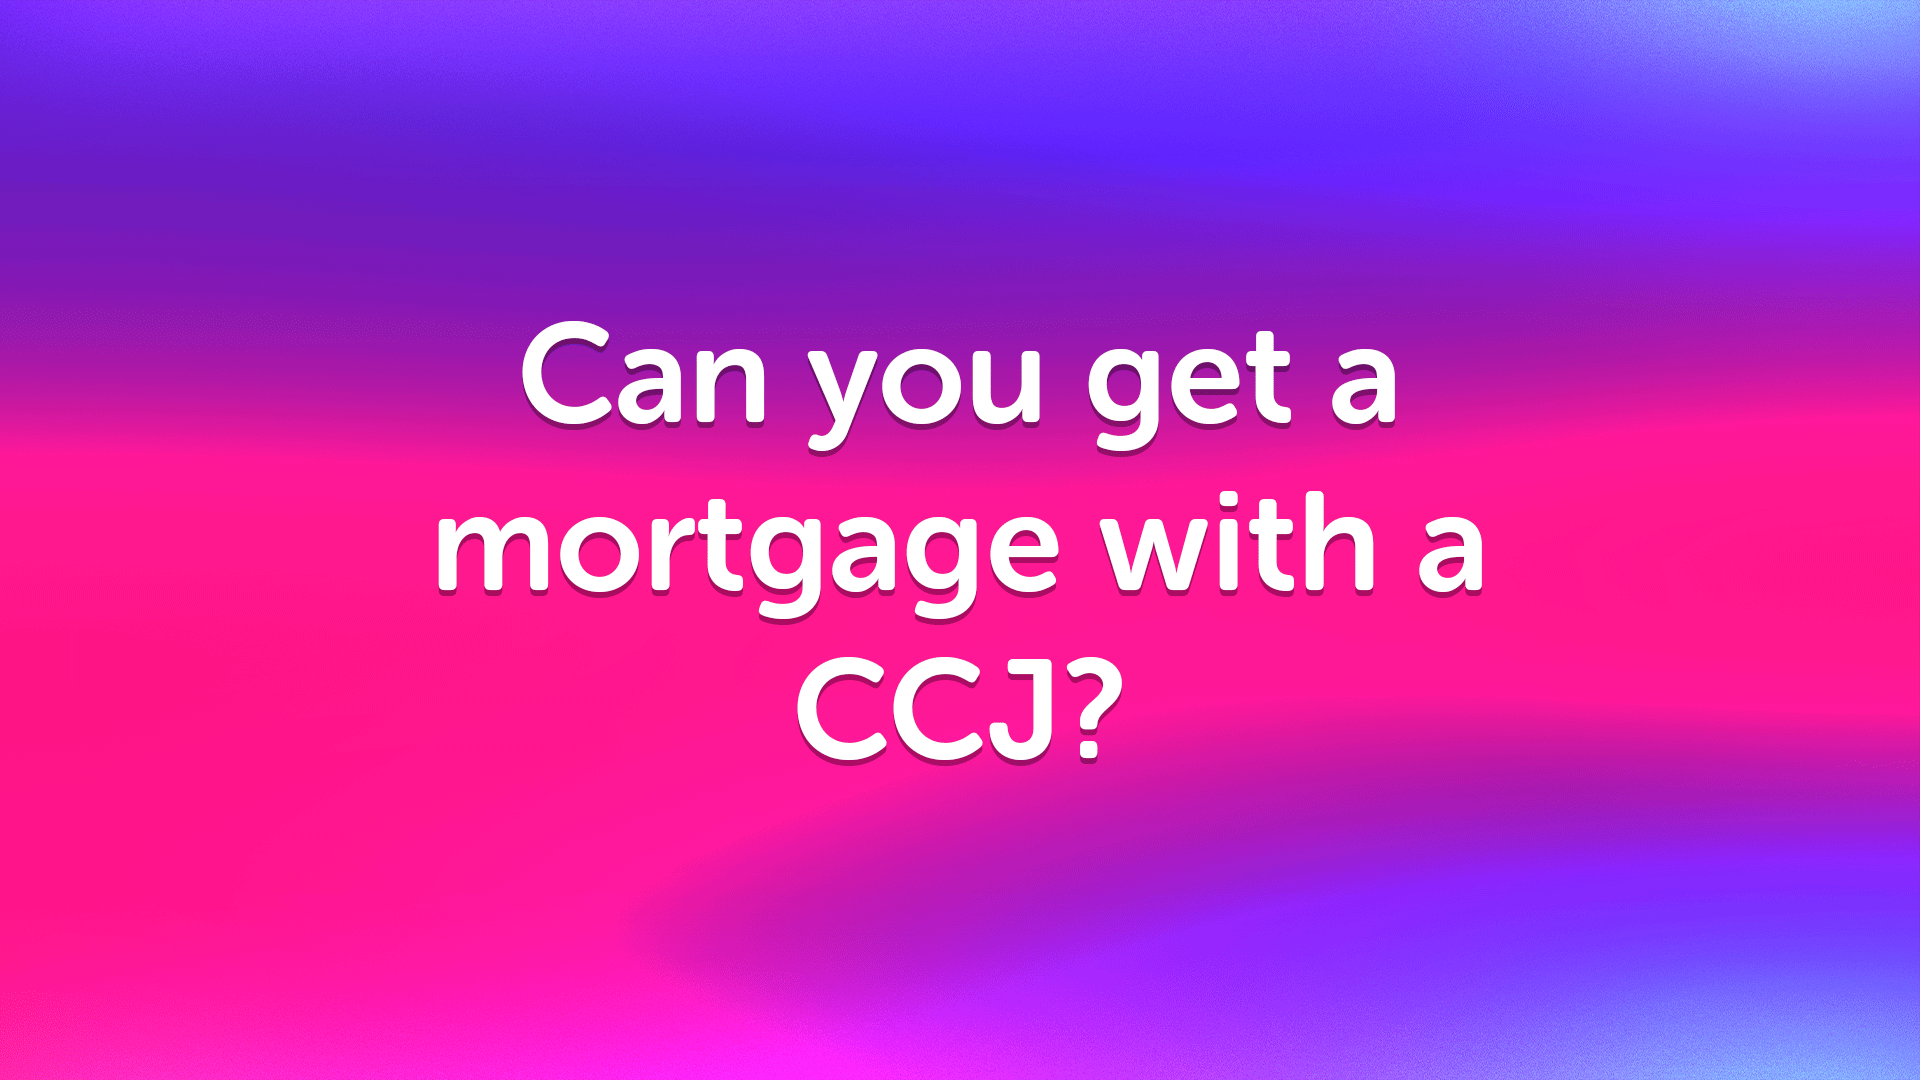 Mortgage With CCJ in Manchester